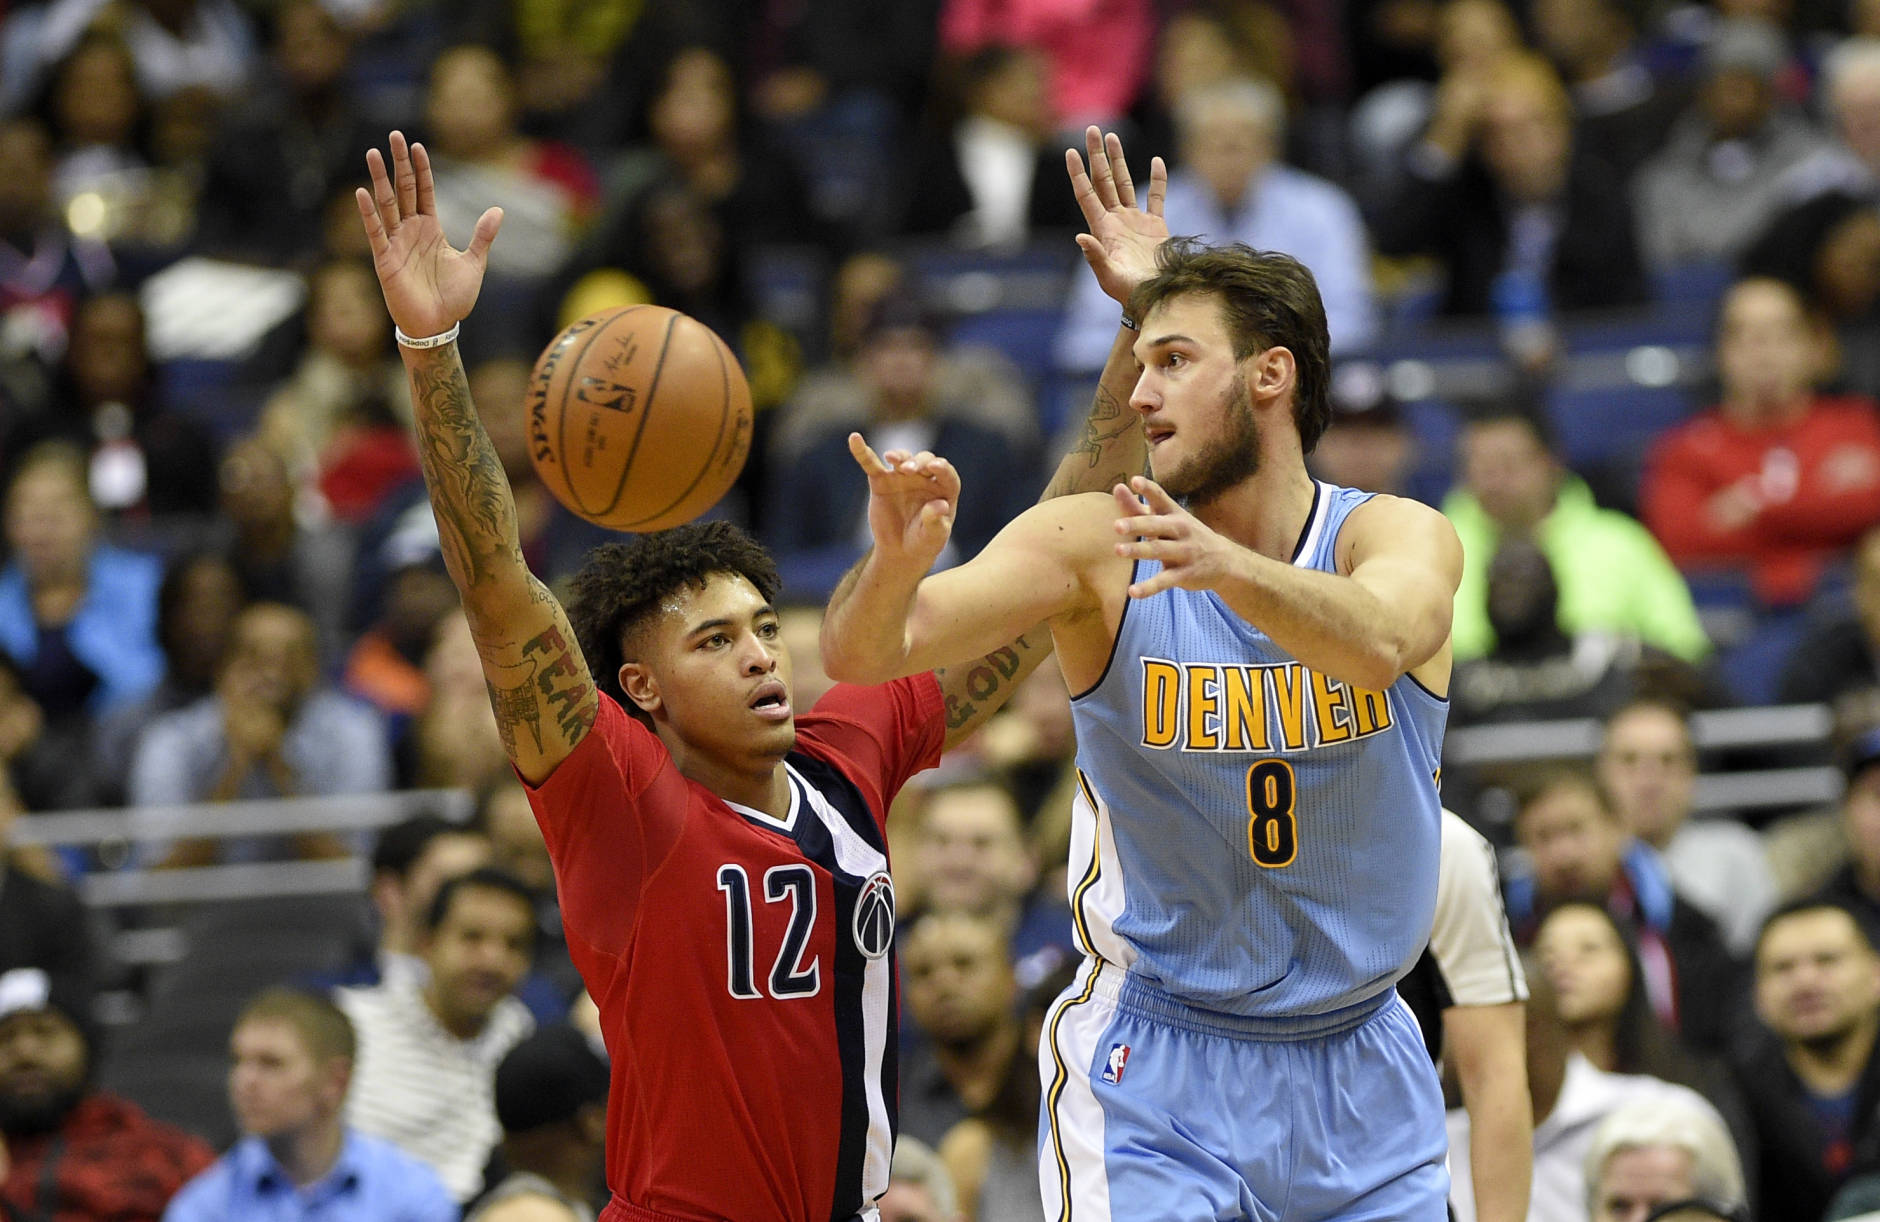 Denver Nuggets forward Danilo Gallinari, of Italy, (8) passes the ball past Washington Wizards forward Kelly Oubre Jr. (12) during the second half of an NBA basketball game, Thursday, Dec. 8, 2016, in Washington. The Wizards won 92-85. (AP Photo/Nick Wass)